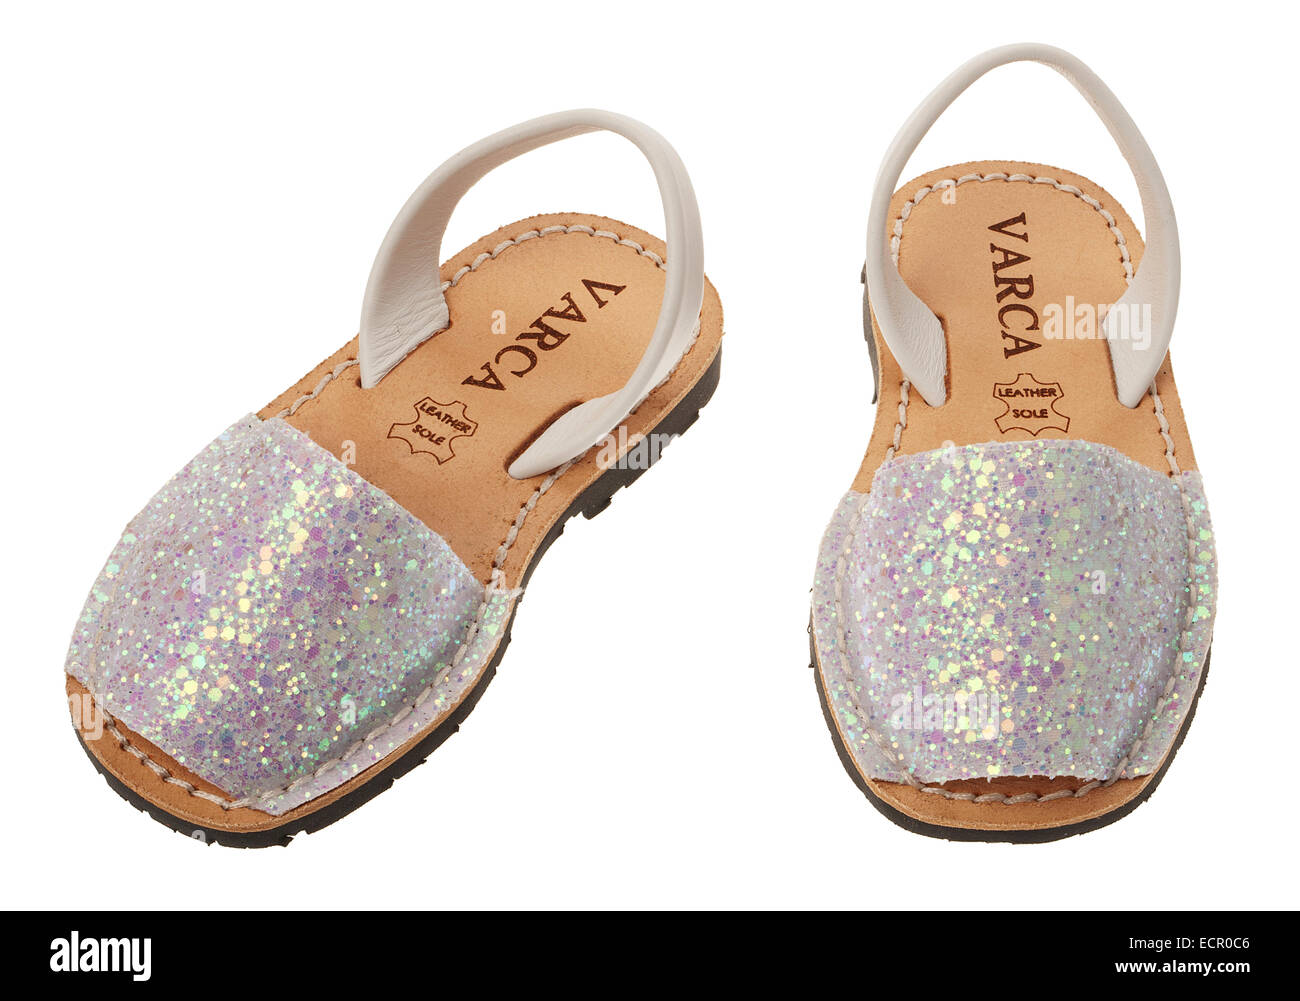 A pair of sparkley summer slip on shoes, for girls. Stock Photo